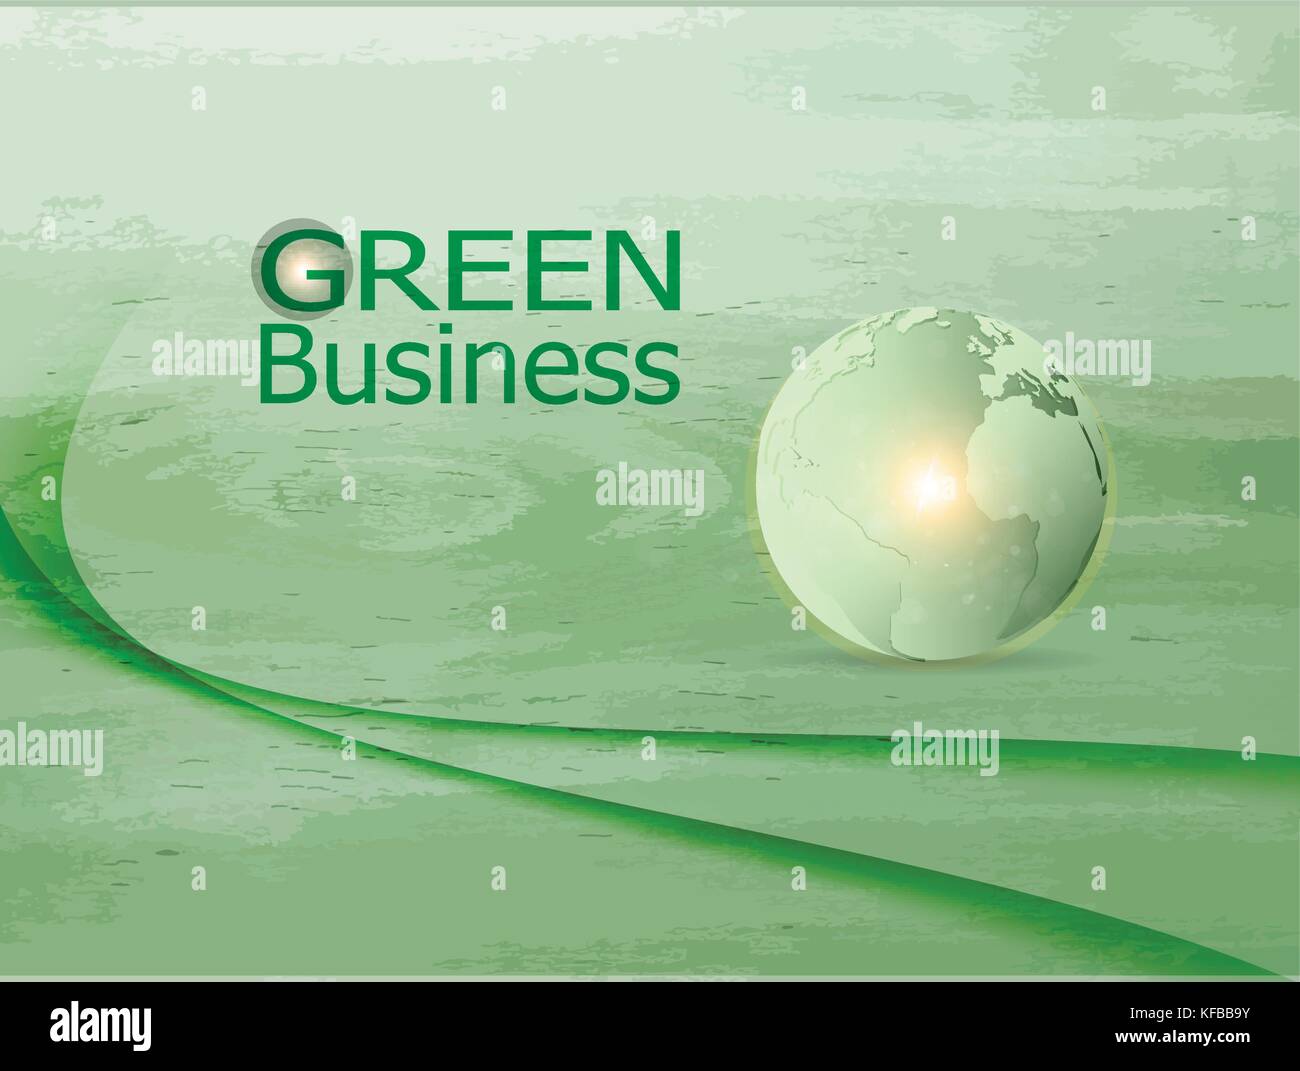 green business background vector. it can be applied for kinds of media presentation such as background,backdrop,illustration,poster,printing or others Stock Vector